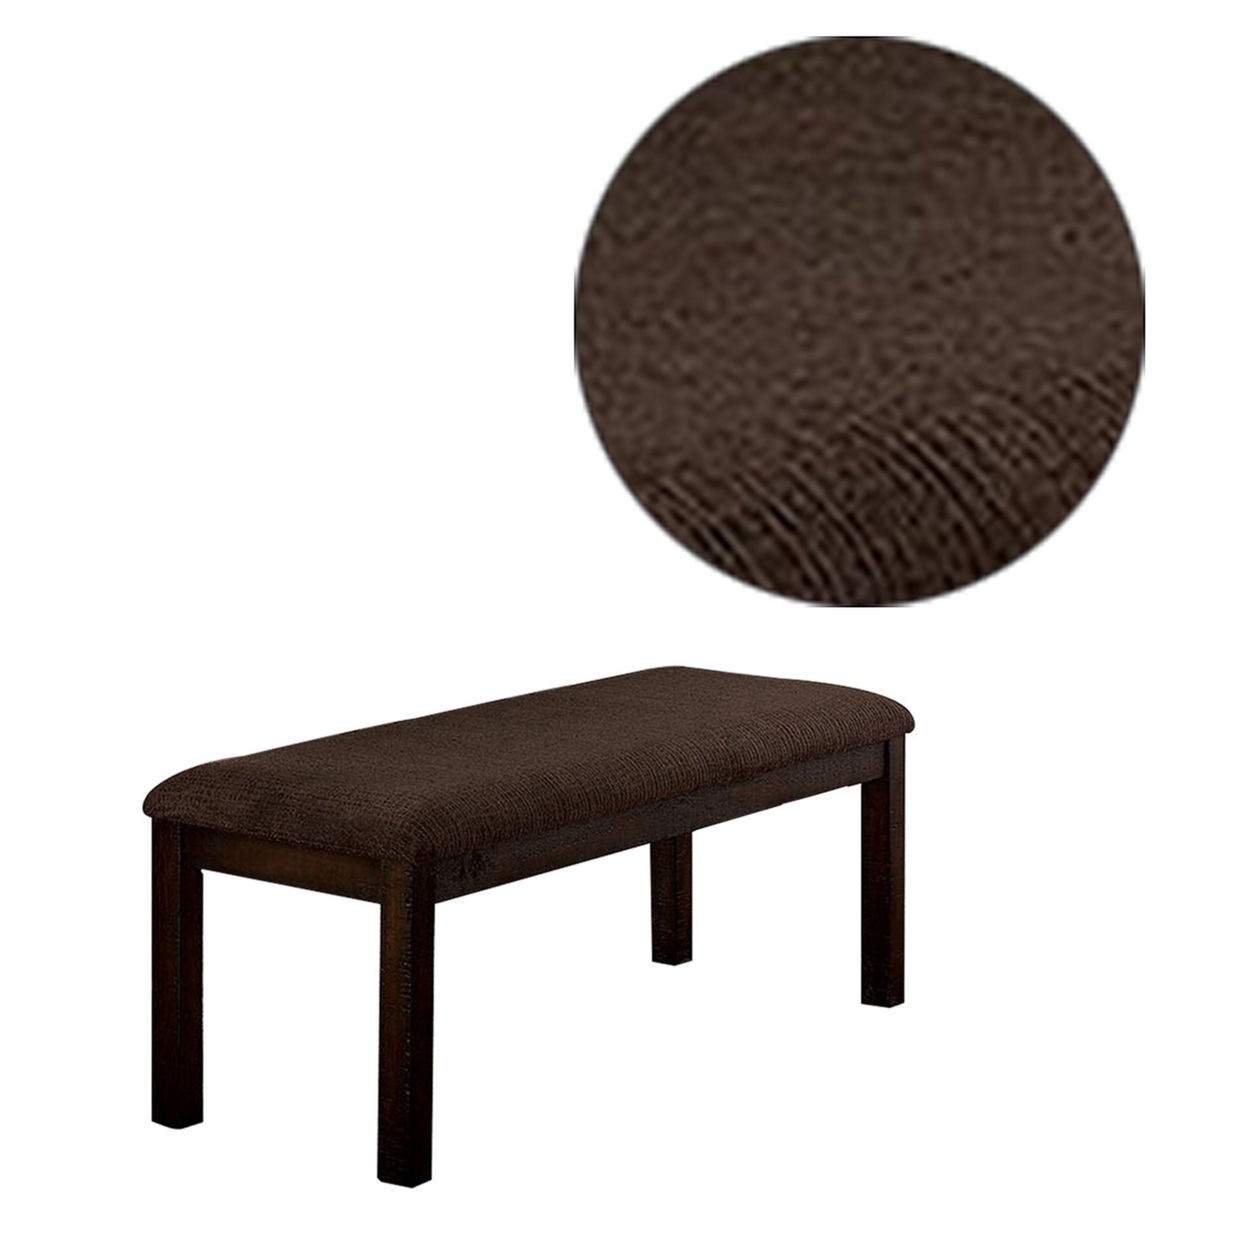 18 Inch Padded Bench With Wooden Frame, Brown- Saltoro Sherpi